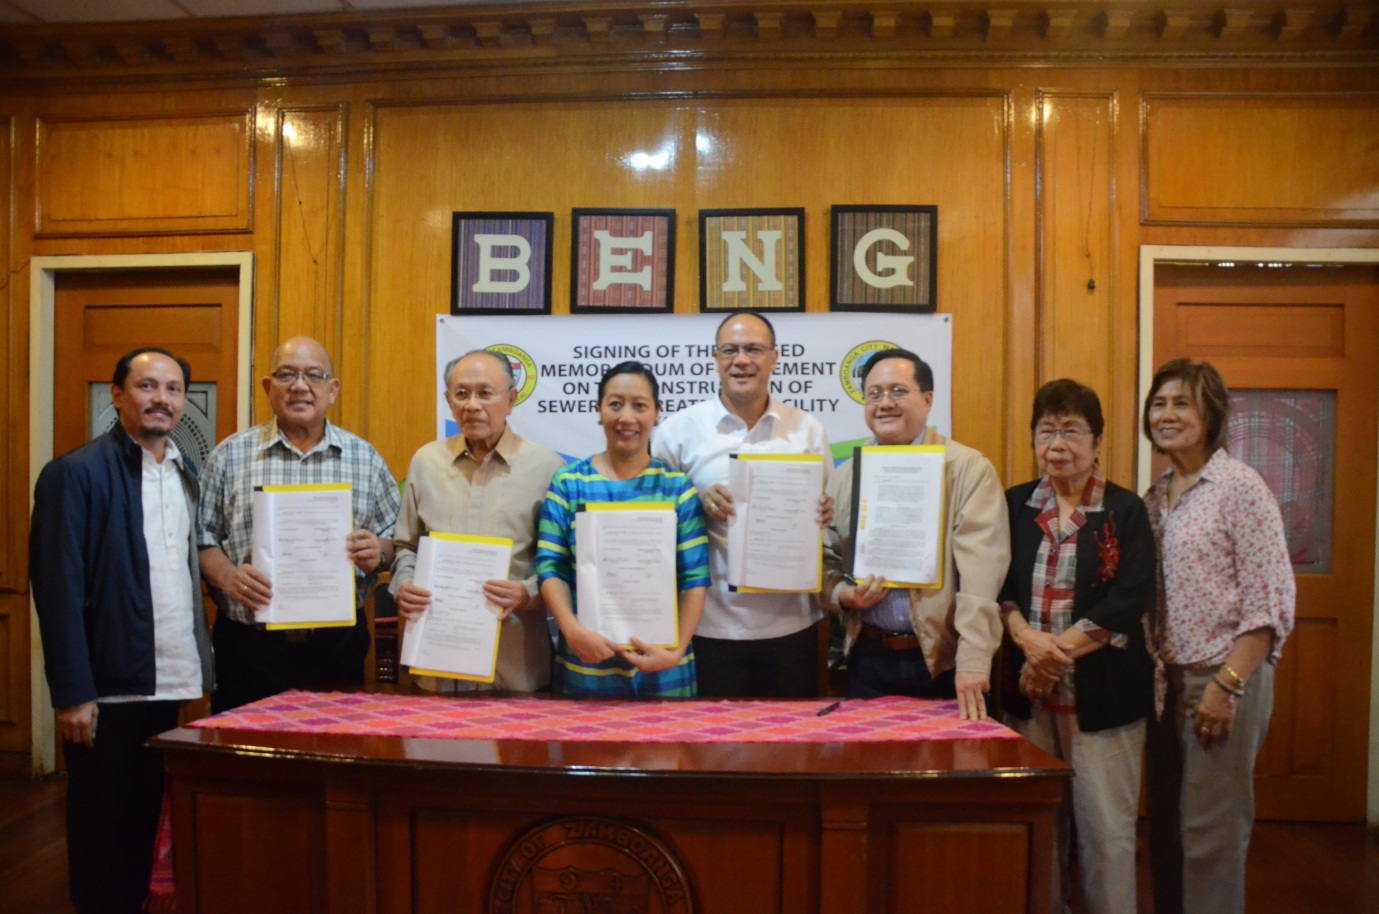 (From left to right) ZCWD CorPlan Department Manager Michael Angelo M. Carbon, Councilor Cesar M. Jimenez, City Legal Officer Jesus C. Carbon, Mayor Maria Isabelle G. Climaco, ZCWD General Manager Leonardo Rey D. Vasquez, ZCWD Chairperson Edwin M. Caliolio, ZCWD Director Milagros L. Fernandez, M.D., ZCWD Director Esther G. Orendain during the signing of Revised Memorandum of Agreement on the Construction of sewerage Treatment Facility yesterday